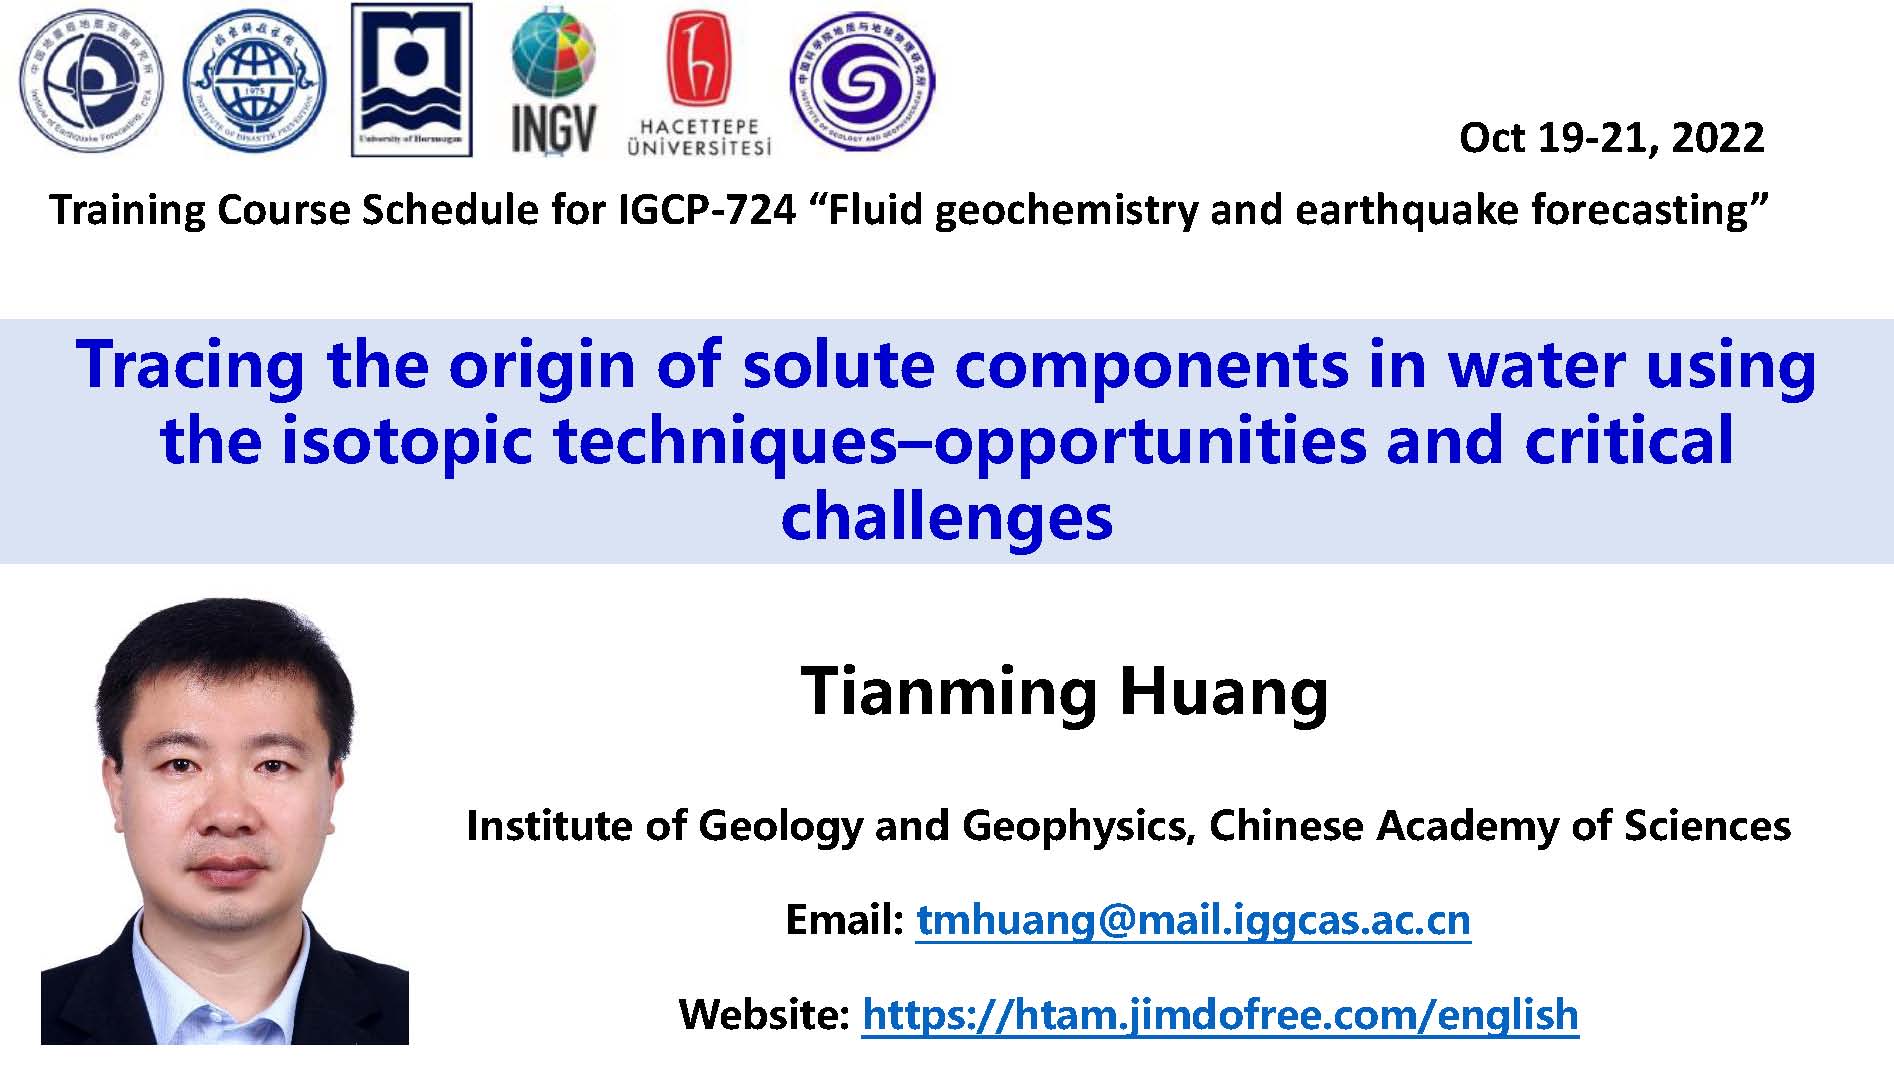 07-Prof. Tianming HUANG-10 IGCtry and earthquake forecasting 1.jpg